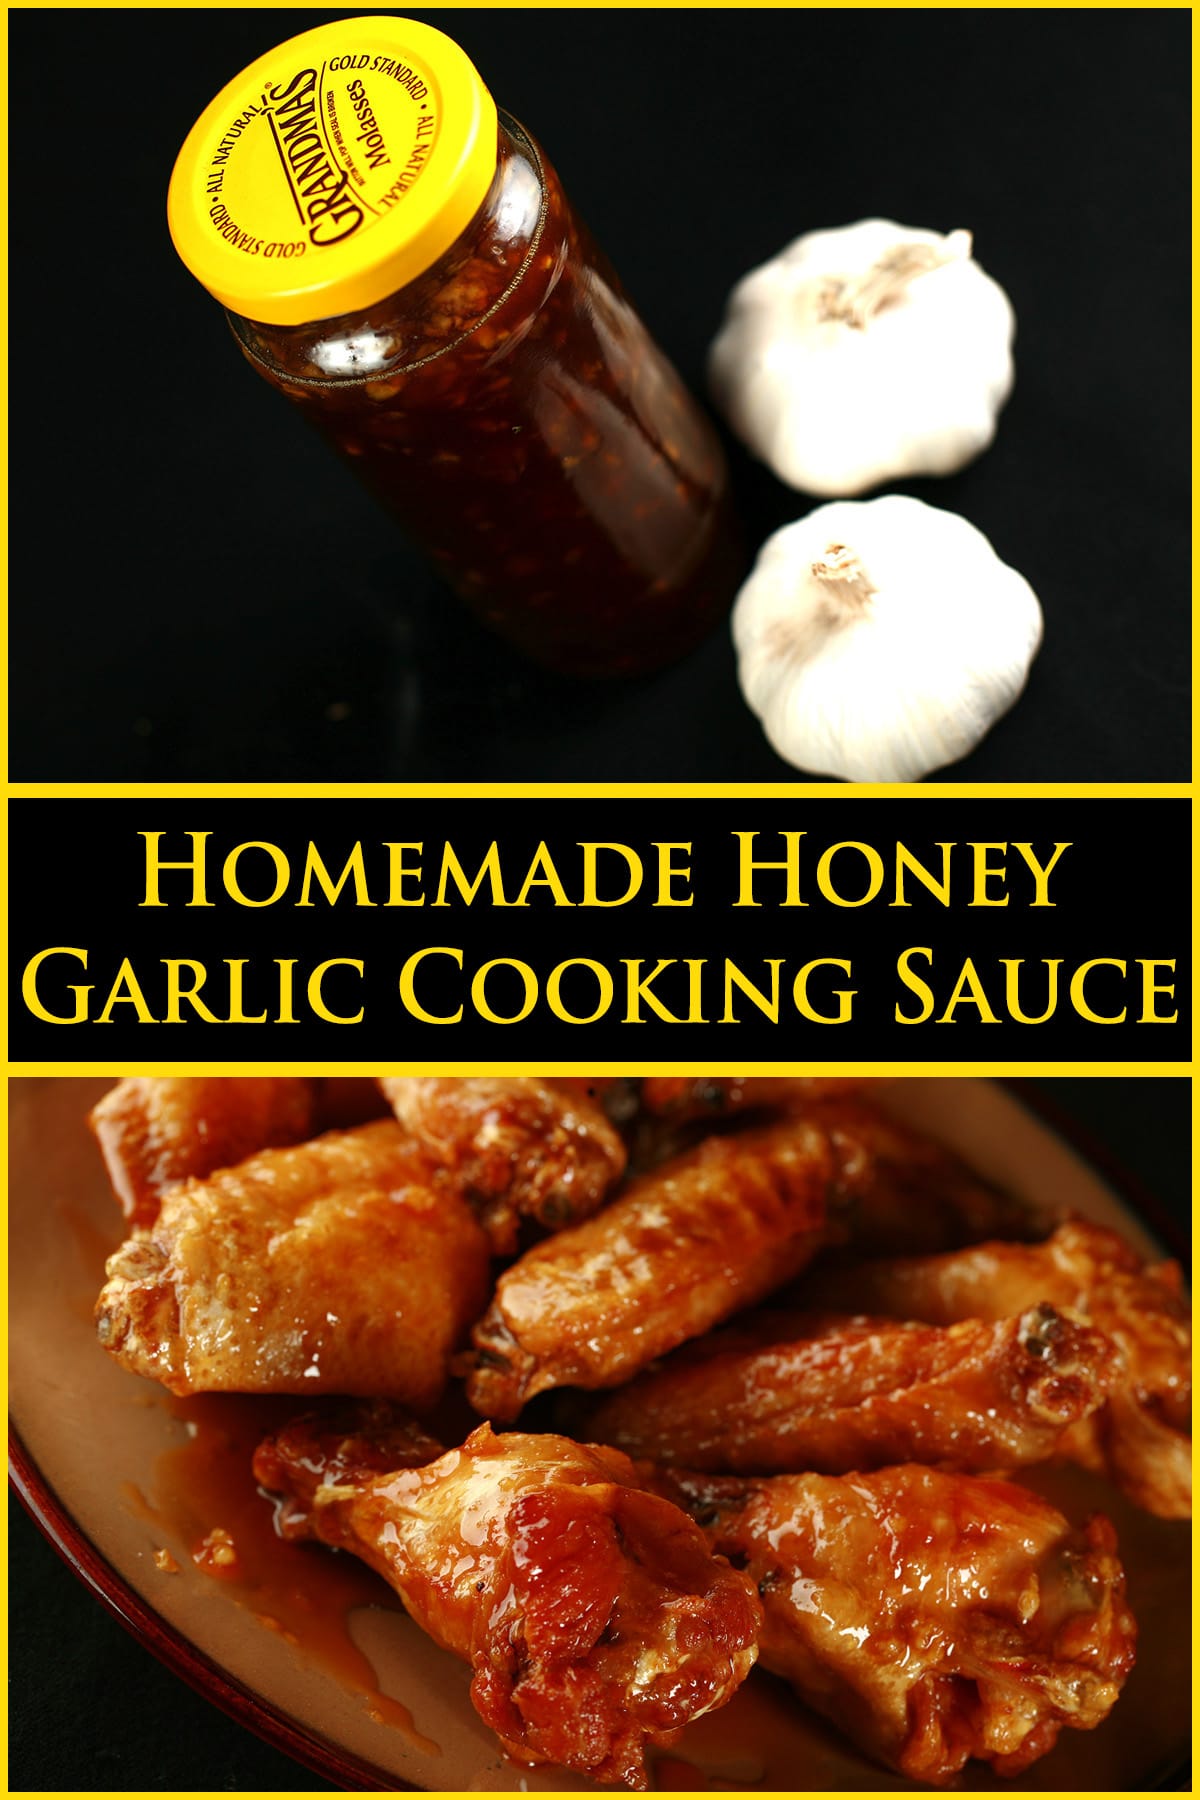 A compilation image. At the top, A tall, slender glass jar filled with a brown cooking sauce, a replica of the VH sauce. 2 whole bulbs of garlic rest at the base of the jar. Yellow text says homemade honey garlic sauce, and a photo of glazed wings is on the bottom.